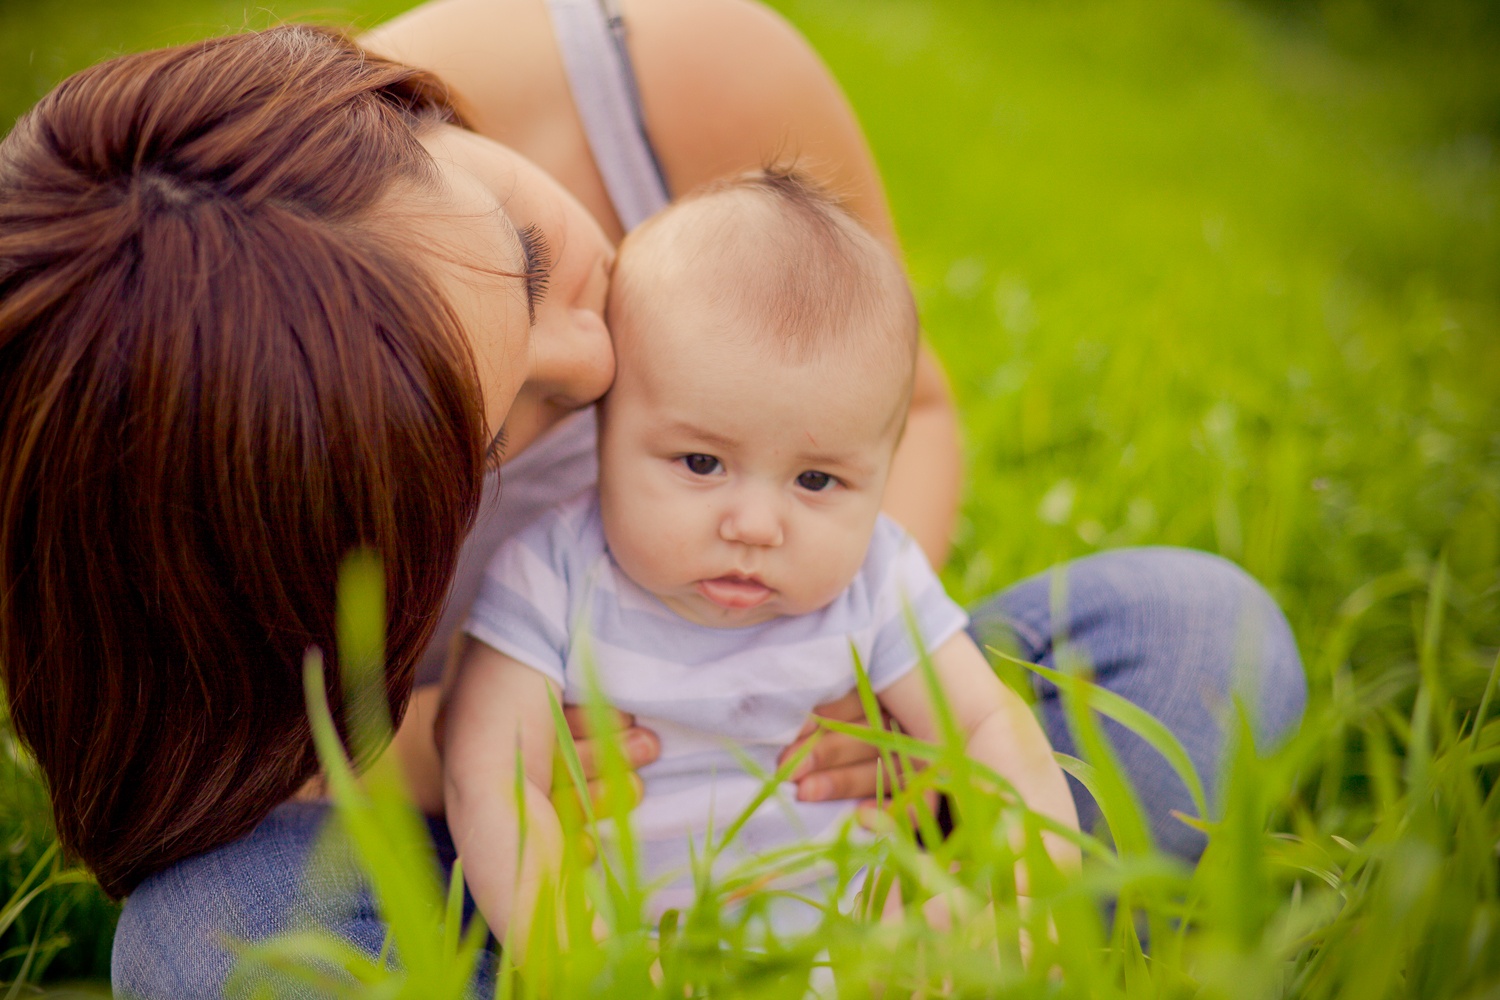 5 Life Lessons We Can All Learn From New Mothers